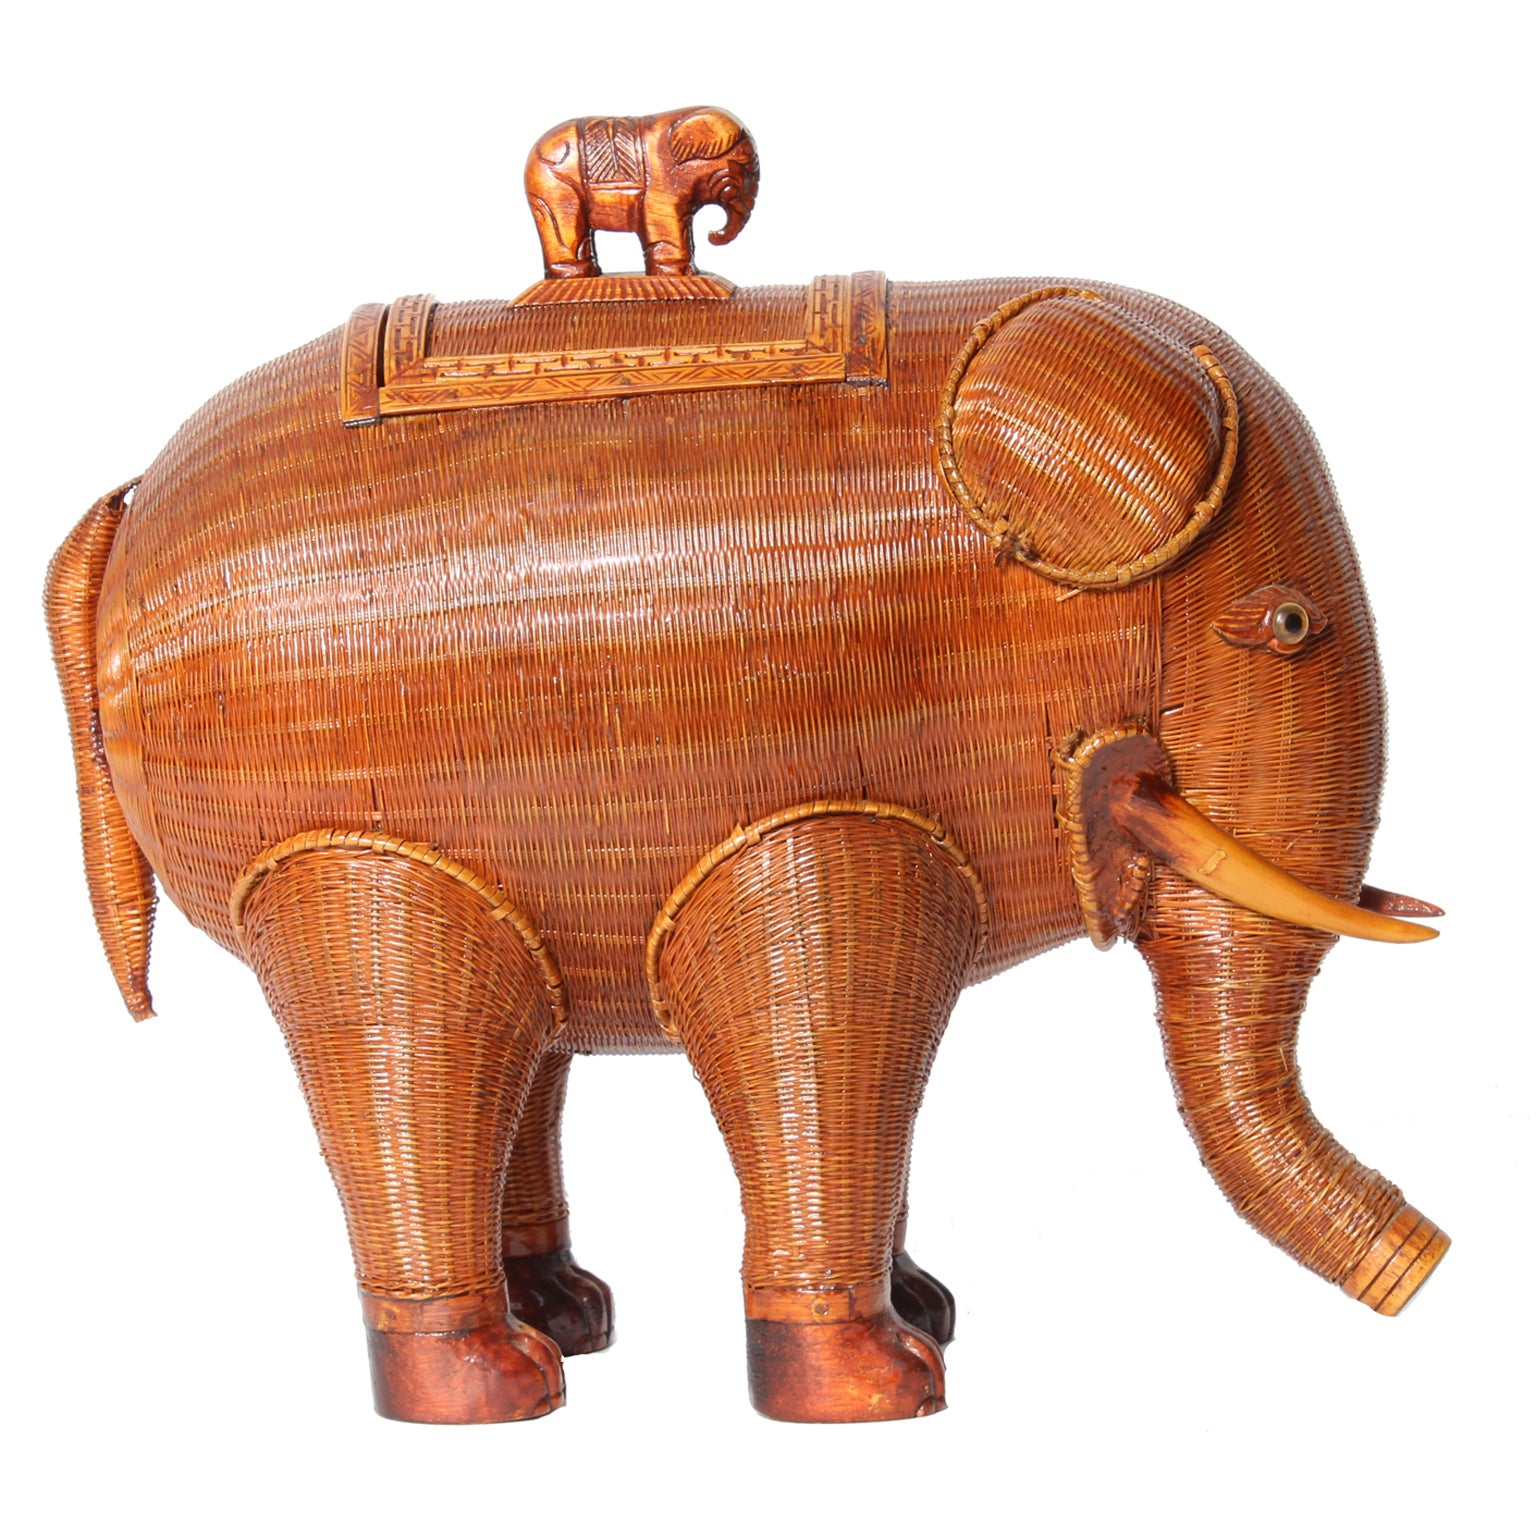 Woven Wicker Elephant with Baby Rider Box